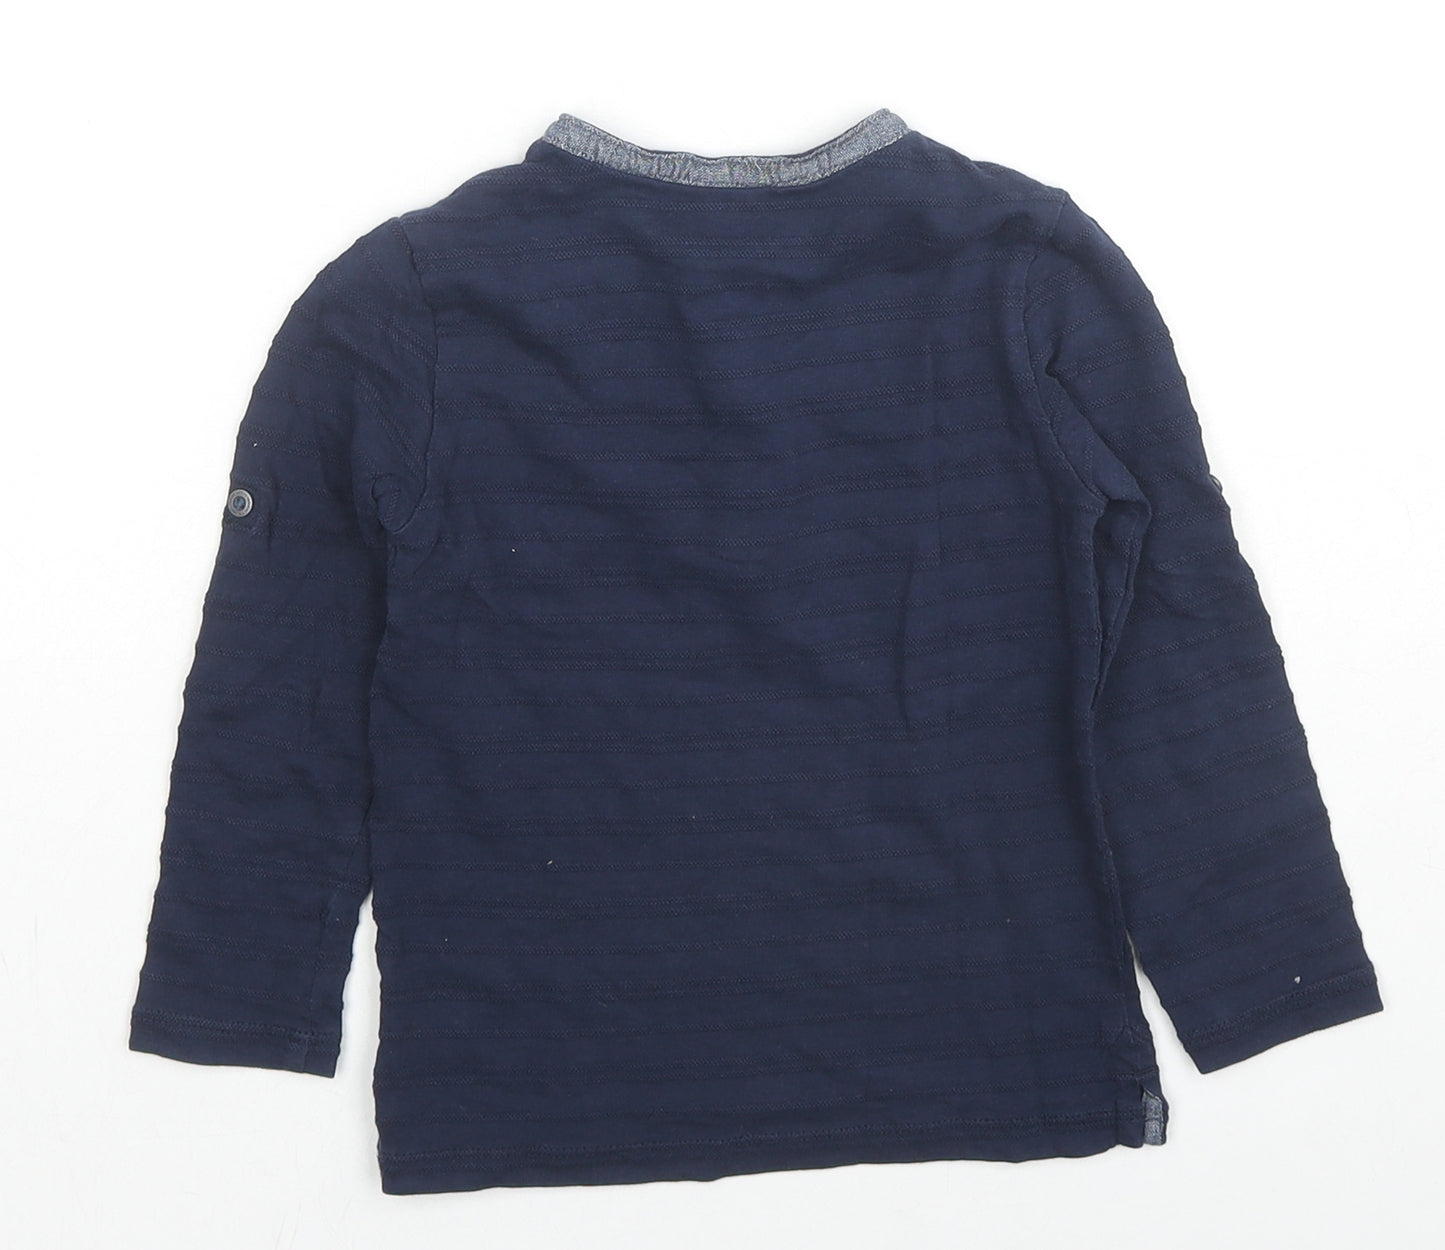 Fagottino Boys Blue Striped Cotton Basic T-Shirt Size 2-3 Years Henley Pullover